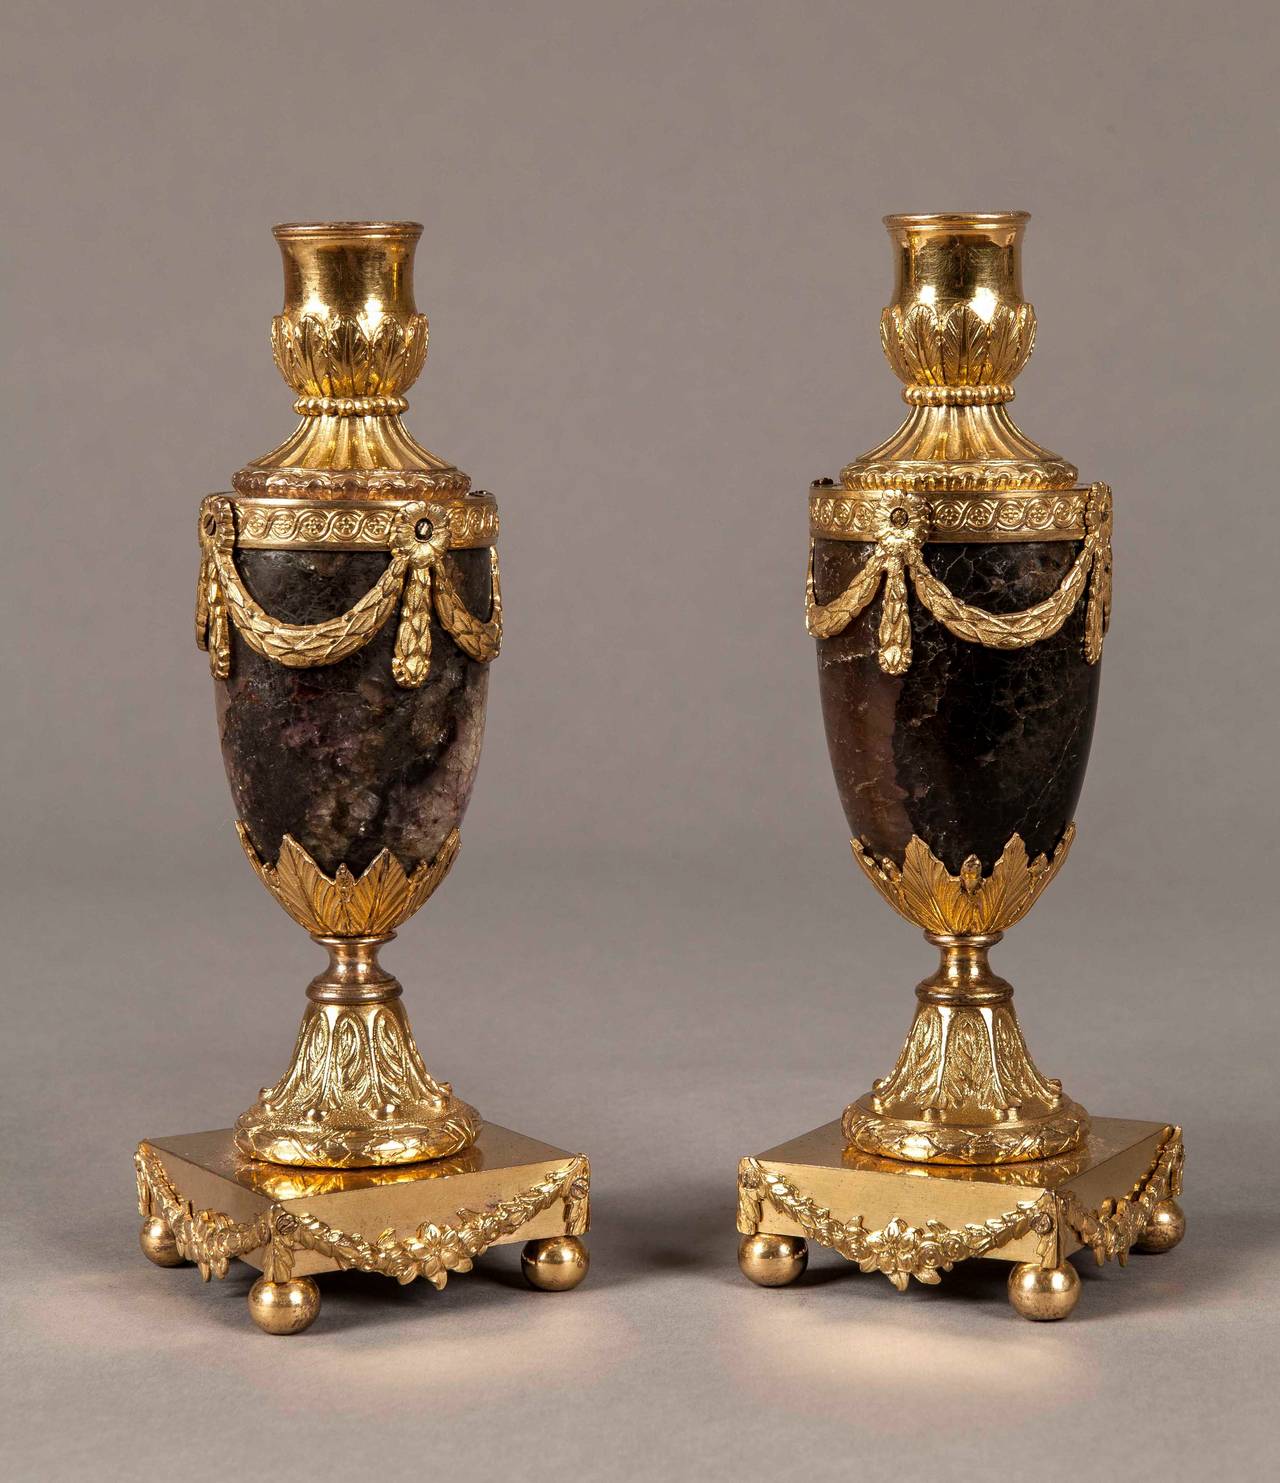 A pair of Blue John Cassolettes by Matthew Boulton

Constructed in gilt bronze and Derbyshire Blue-John fluorspar; the square bases are supported on ball feet, the ovoid bodies enwrapped with swags and garlands, with conical covers; reversible to